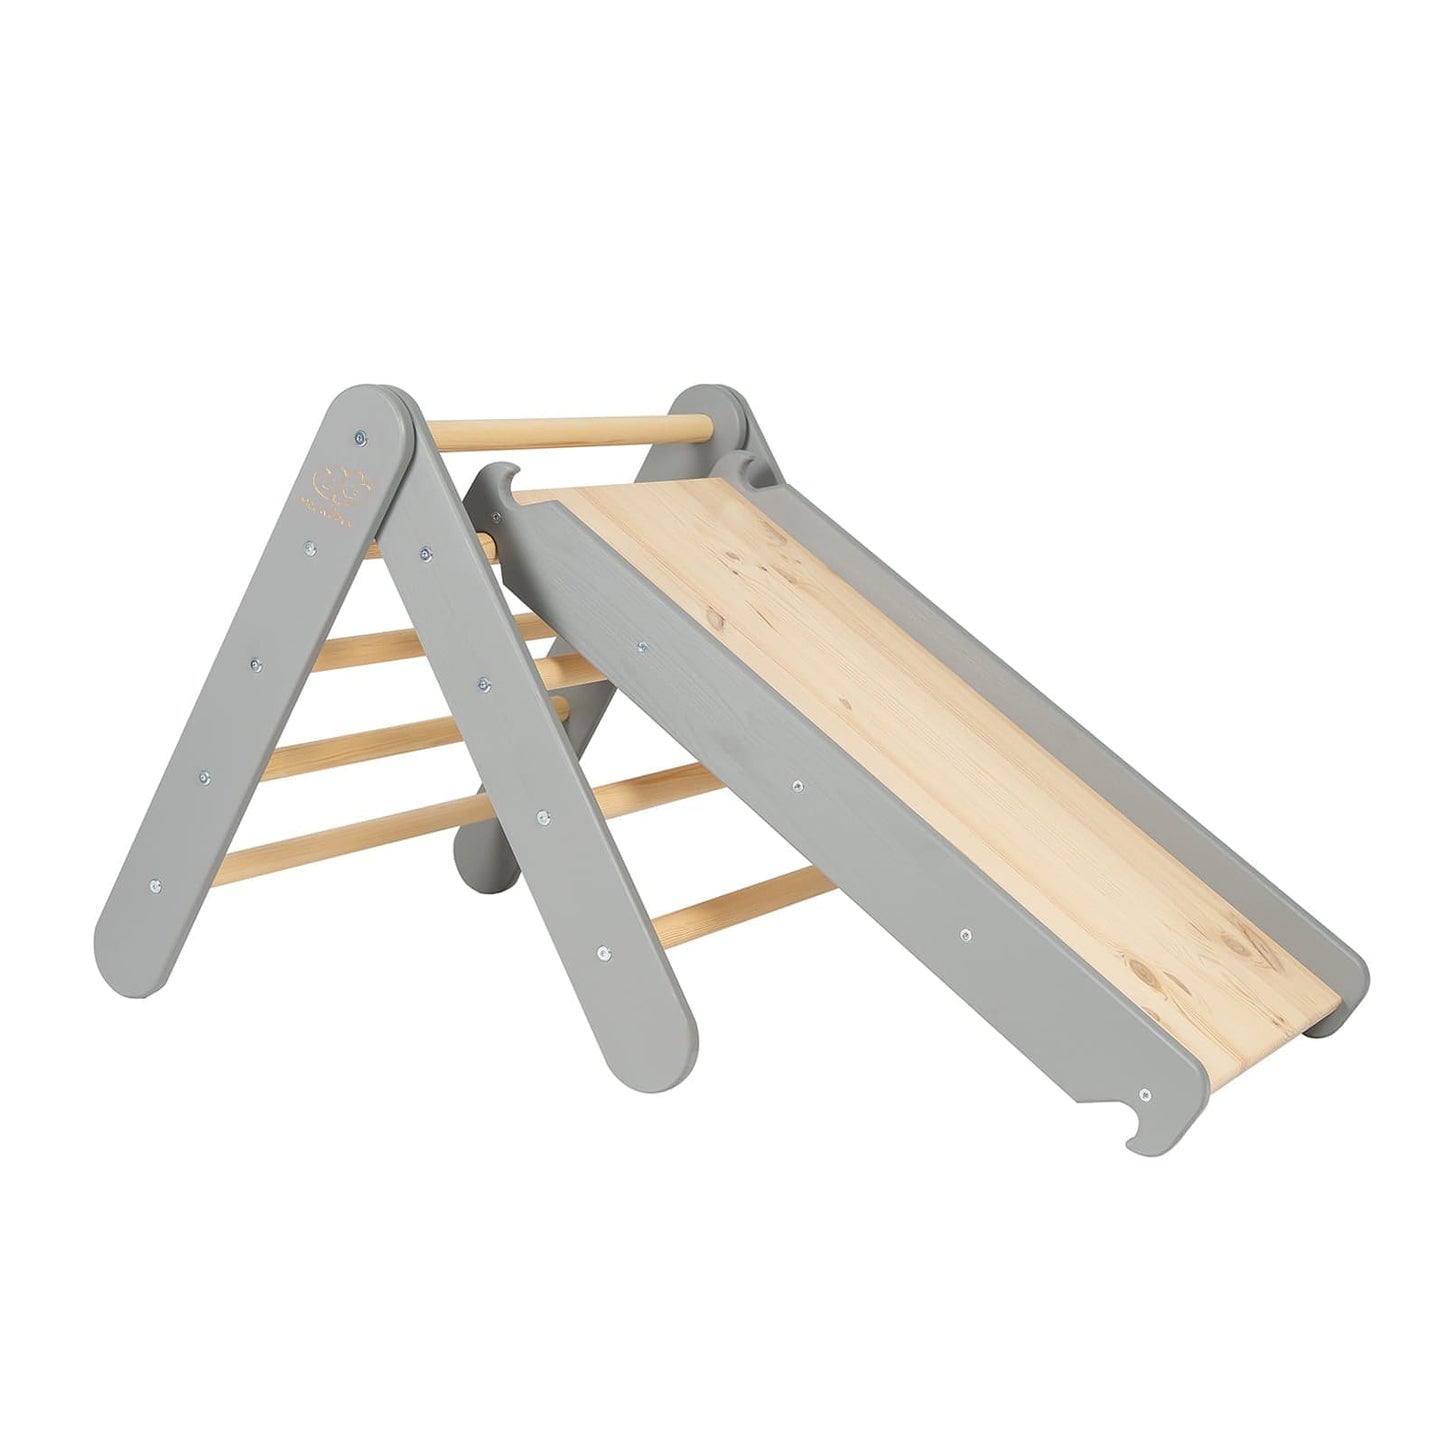 Wooden Slide Climbing Ladder Combo For Kids By MeowBaby - Stylemykid.com